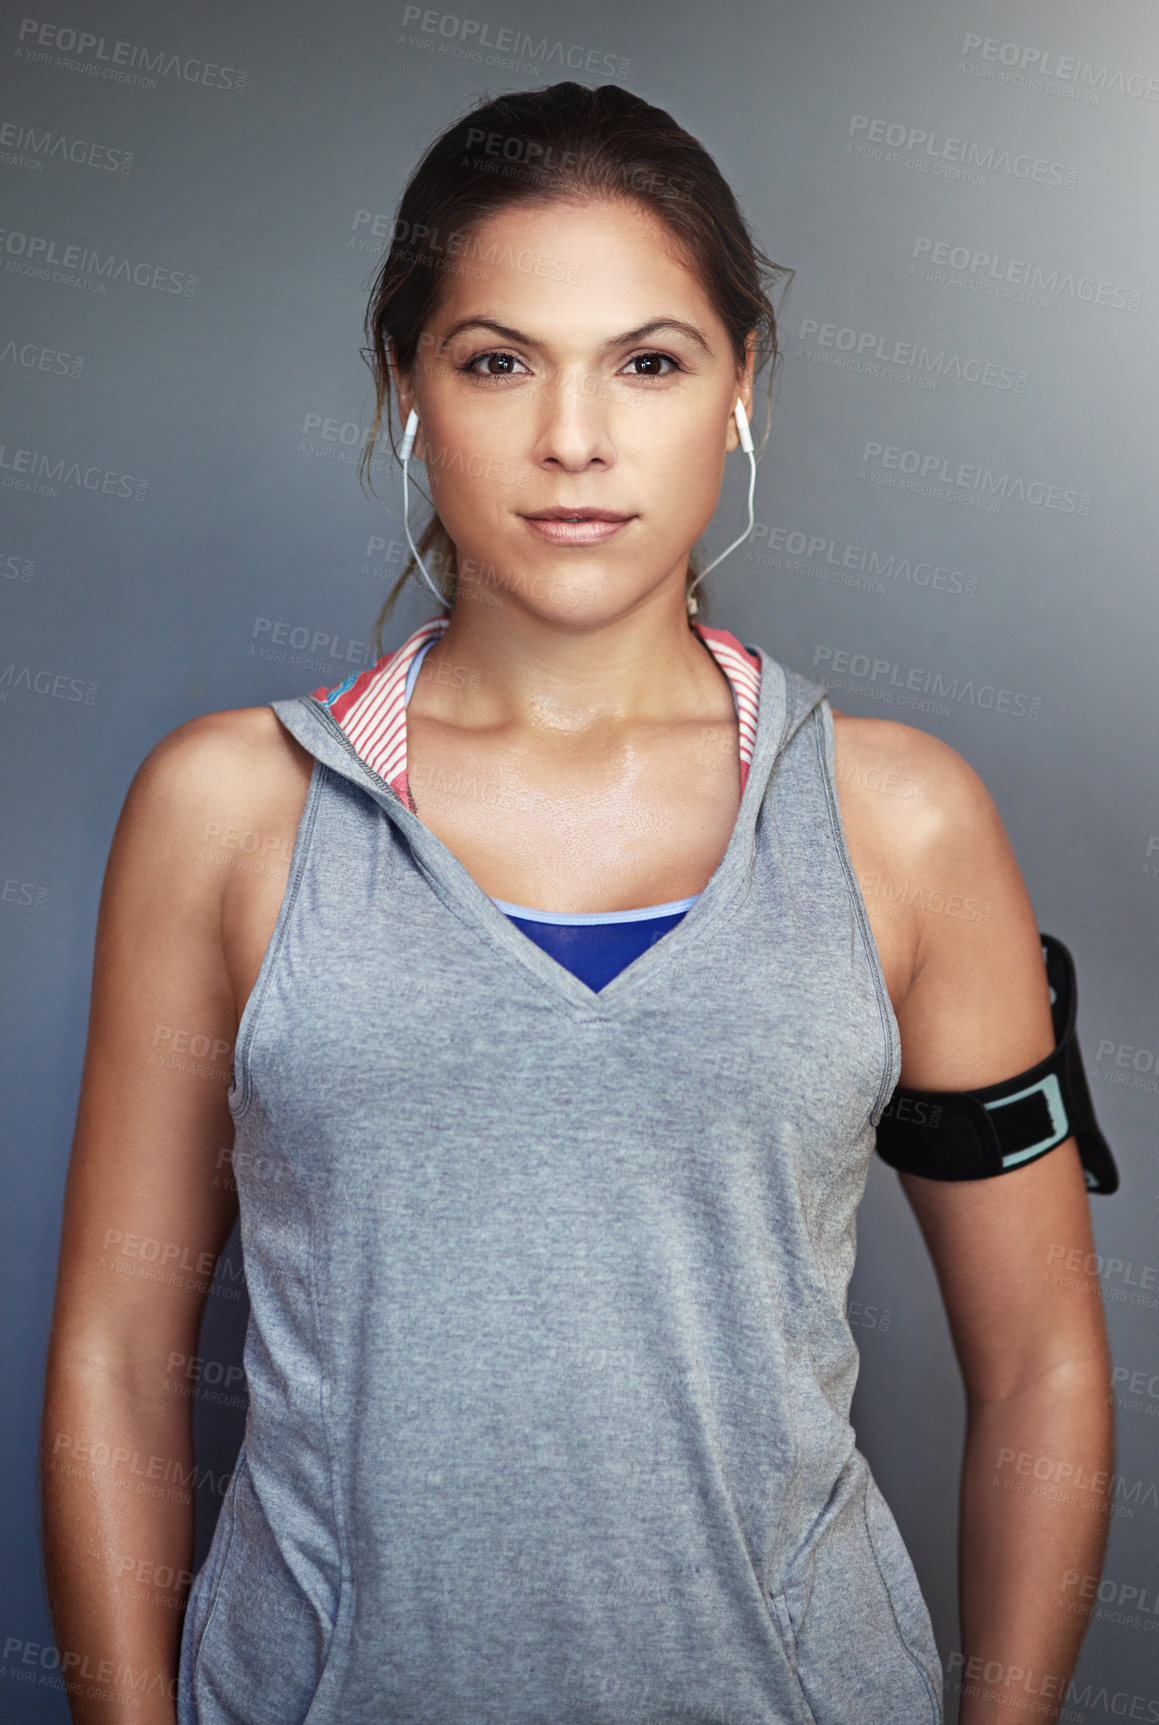 Buy stock photo Studio portrait of a sporty young woman standing against a gray background